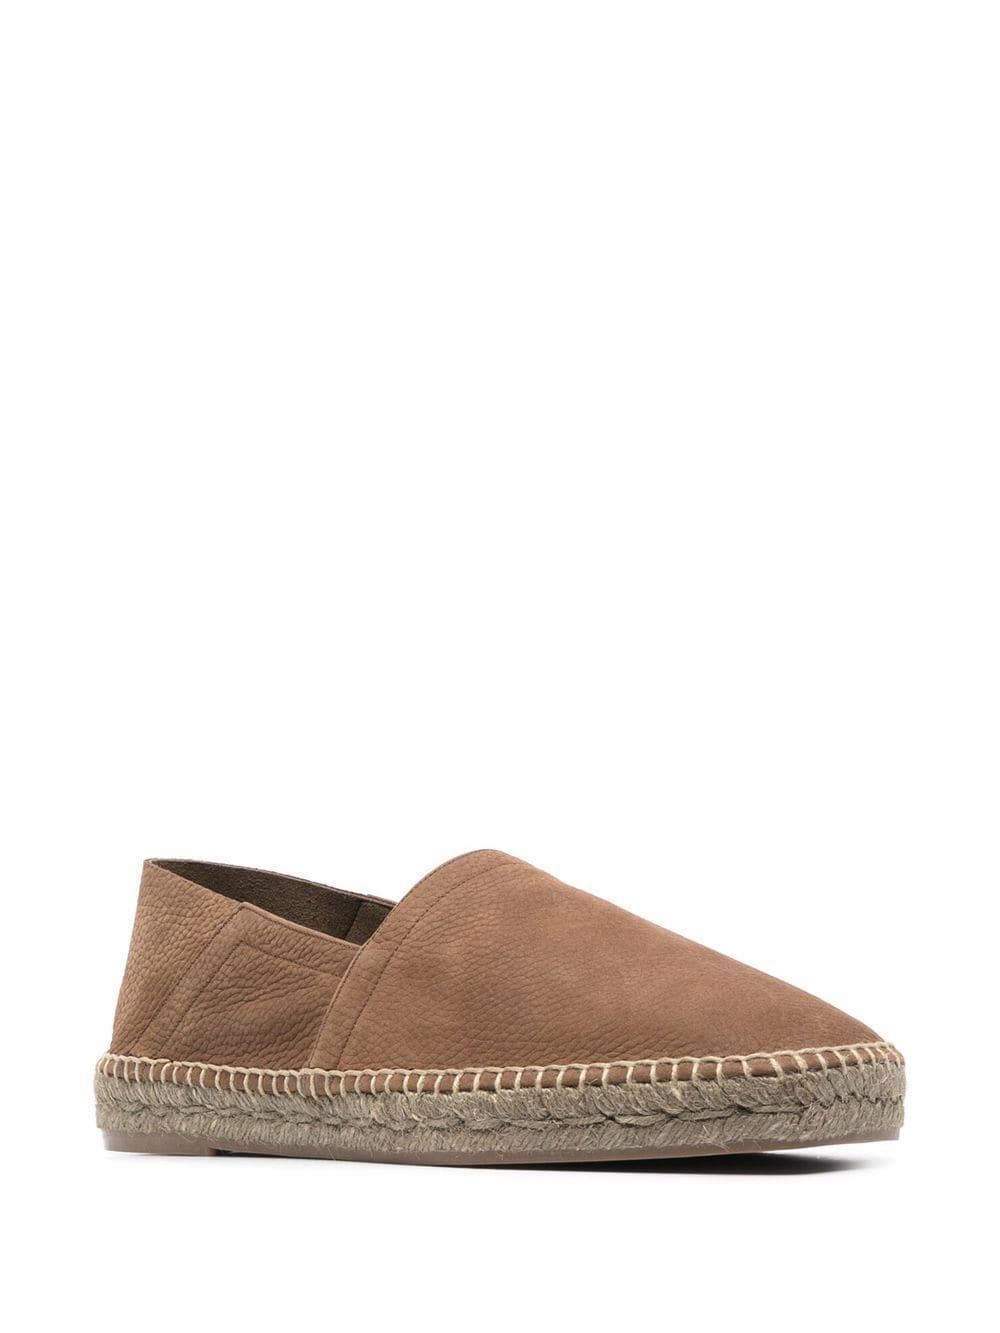 TOM FORD grained leather espadrilles - Brown